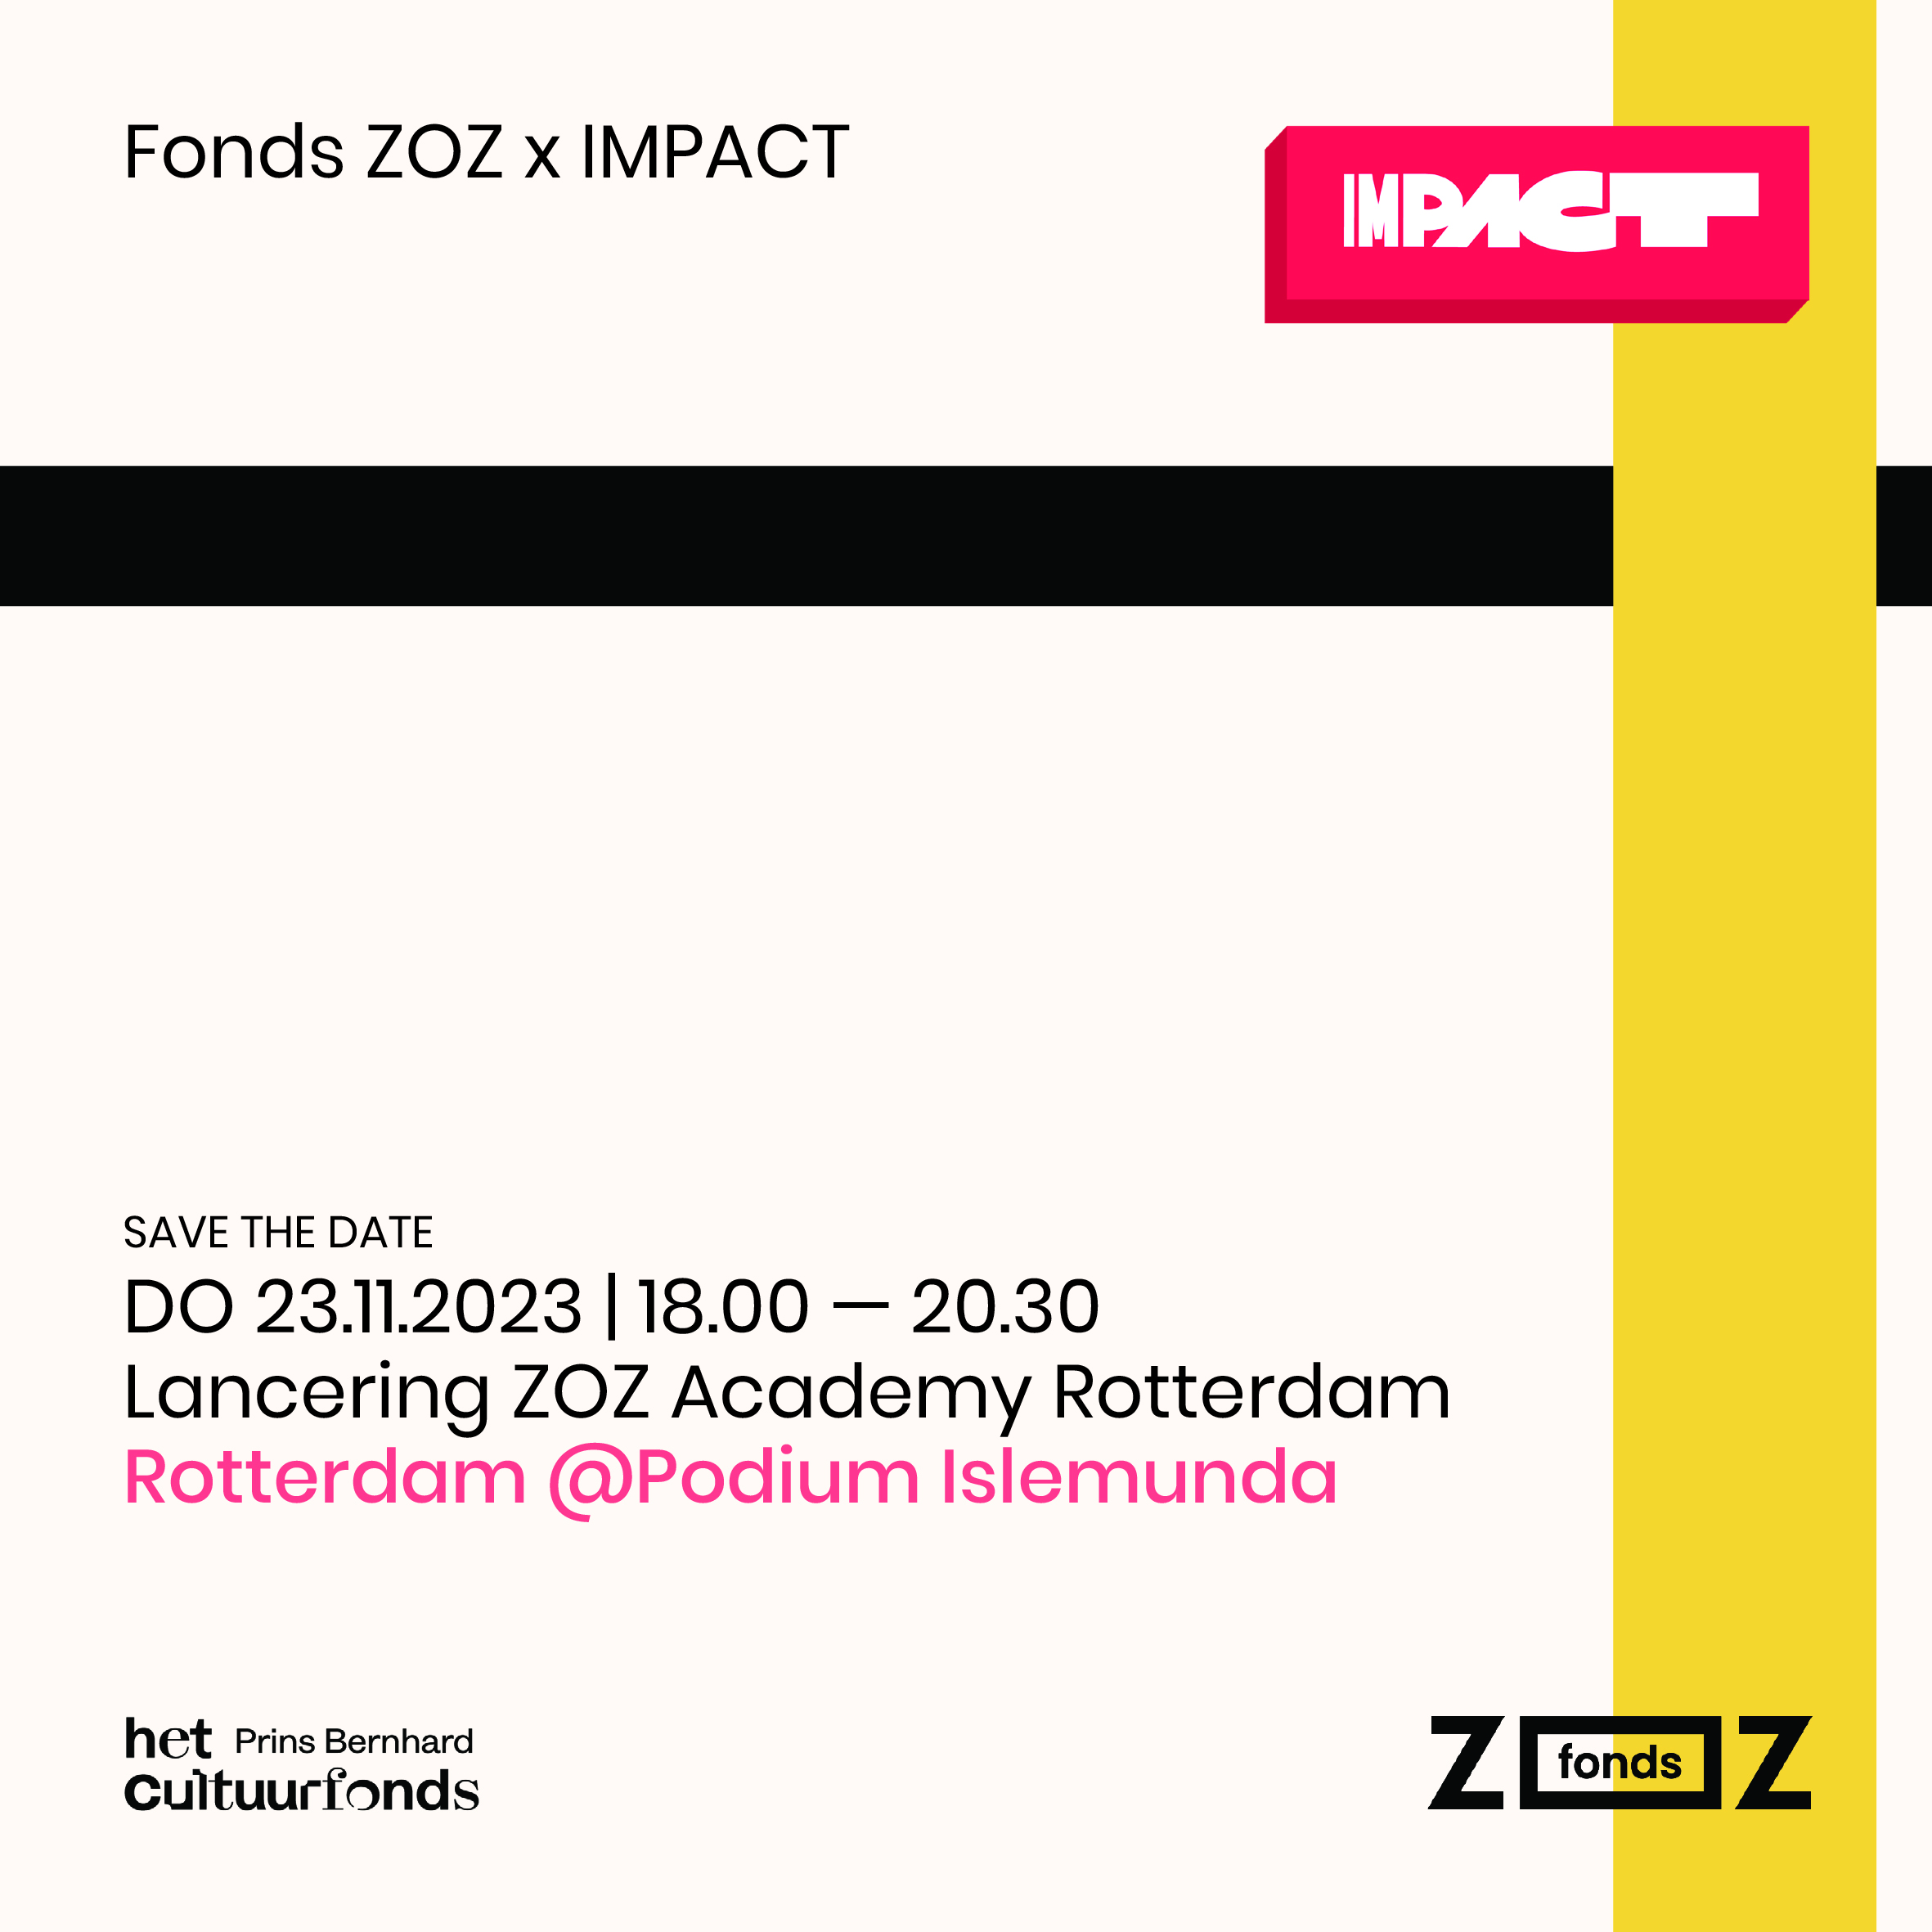 Save the date ZOZXIMPACT 1